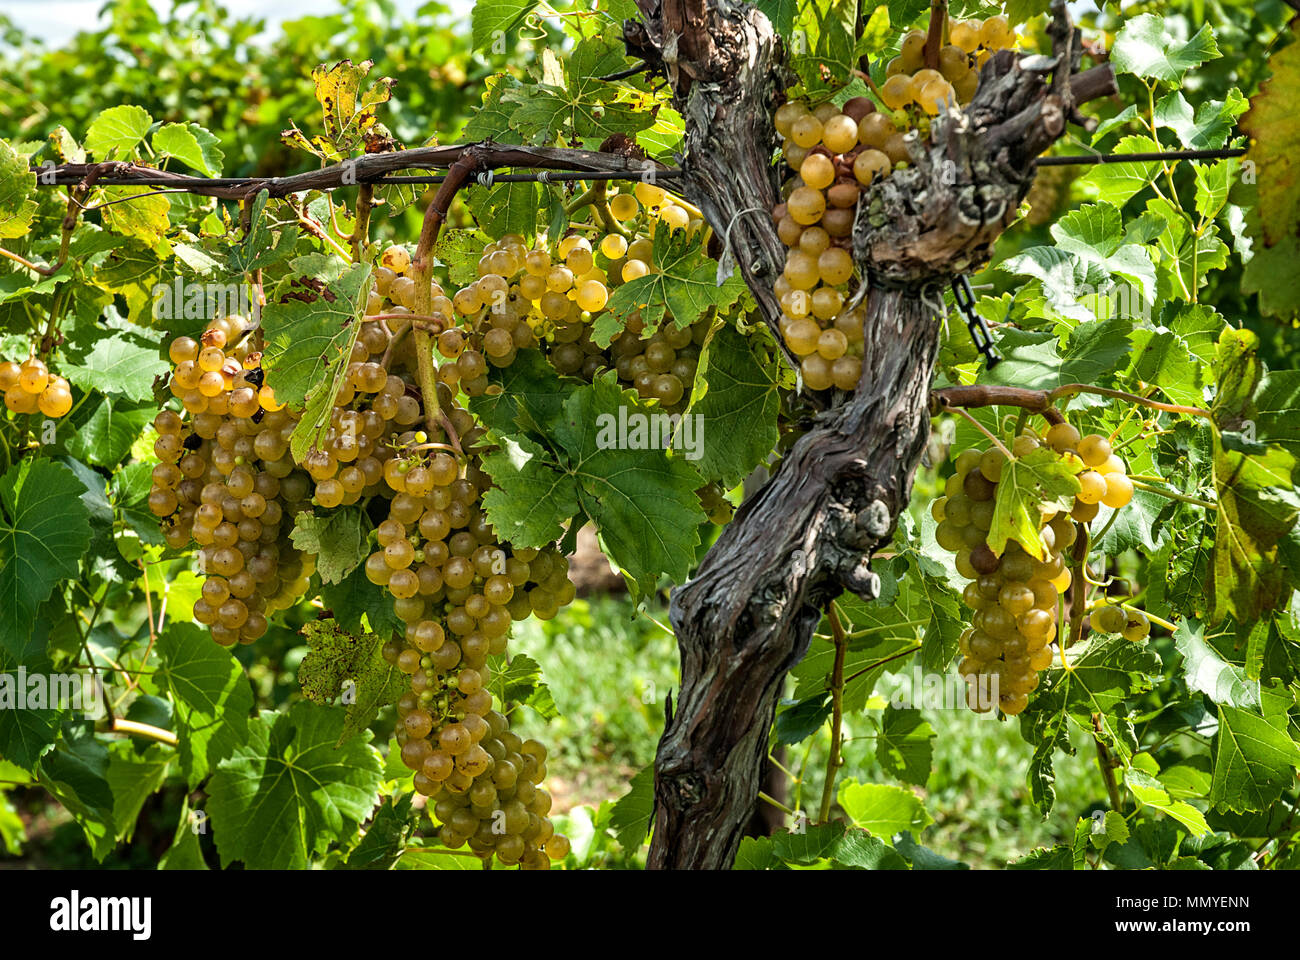 Bunches of ripe white seedless grapes  hanging on the vine at a vineyard. Stock Photo